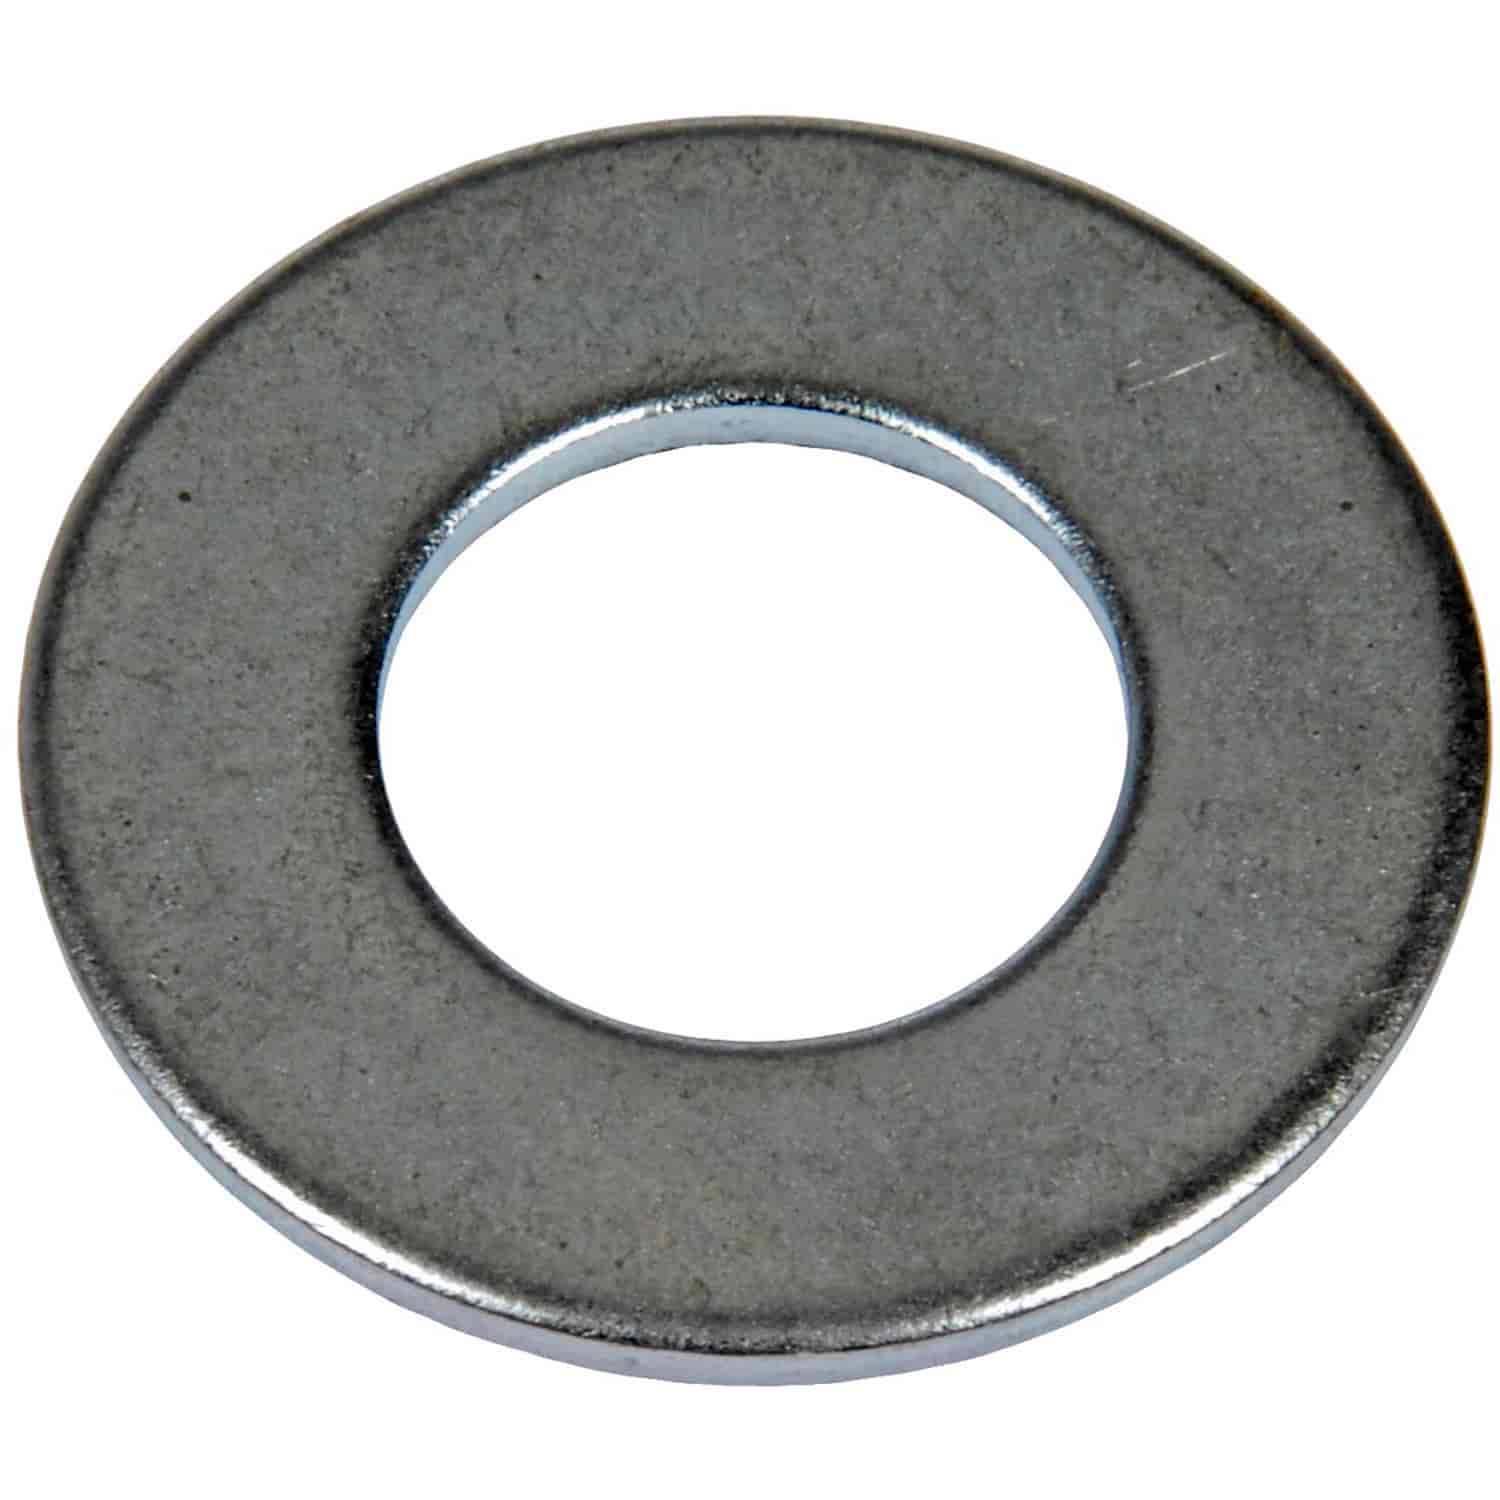 Flat Washer-Grade 5- 7/16 In.